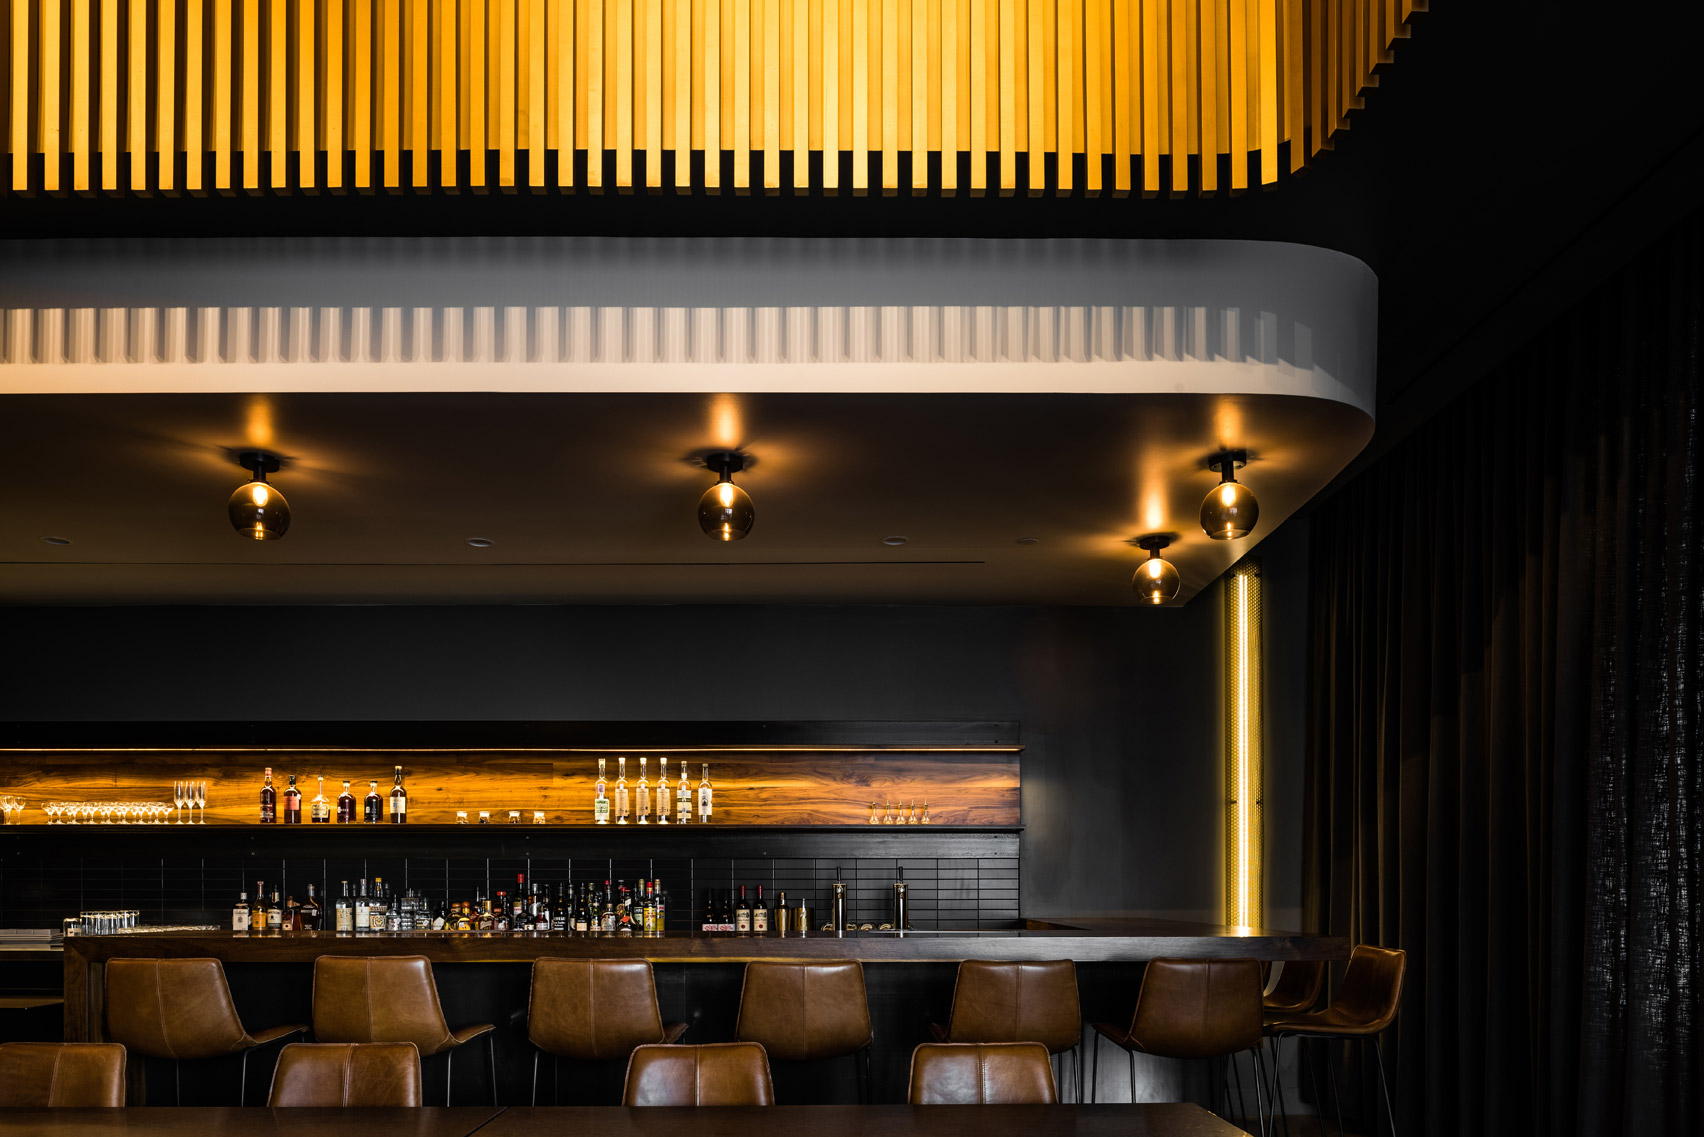 houndstooth-coffee-and-jettison-cocktail-bar-official-sylvan-thirty-texas-usa_dezeen_1704_col_8